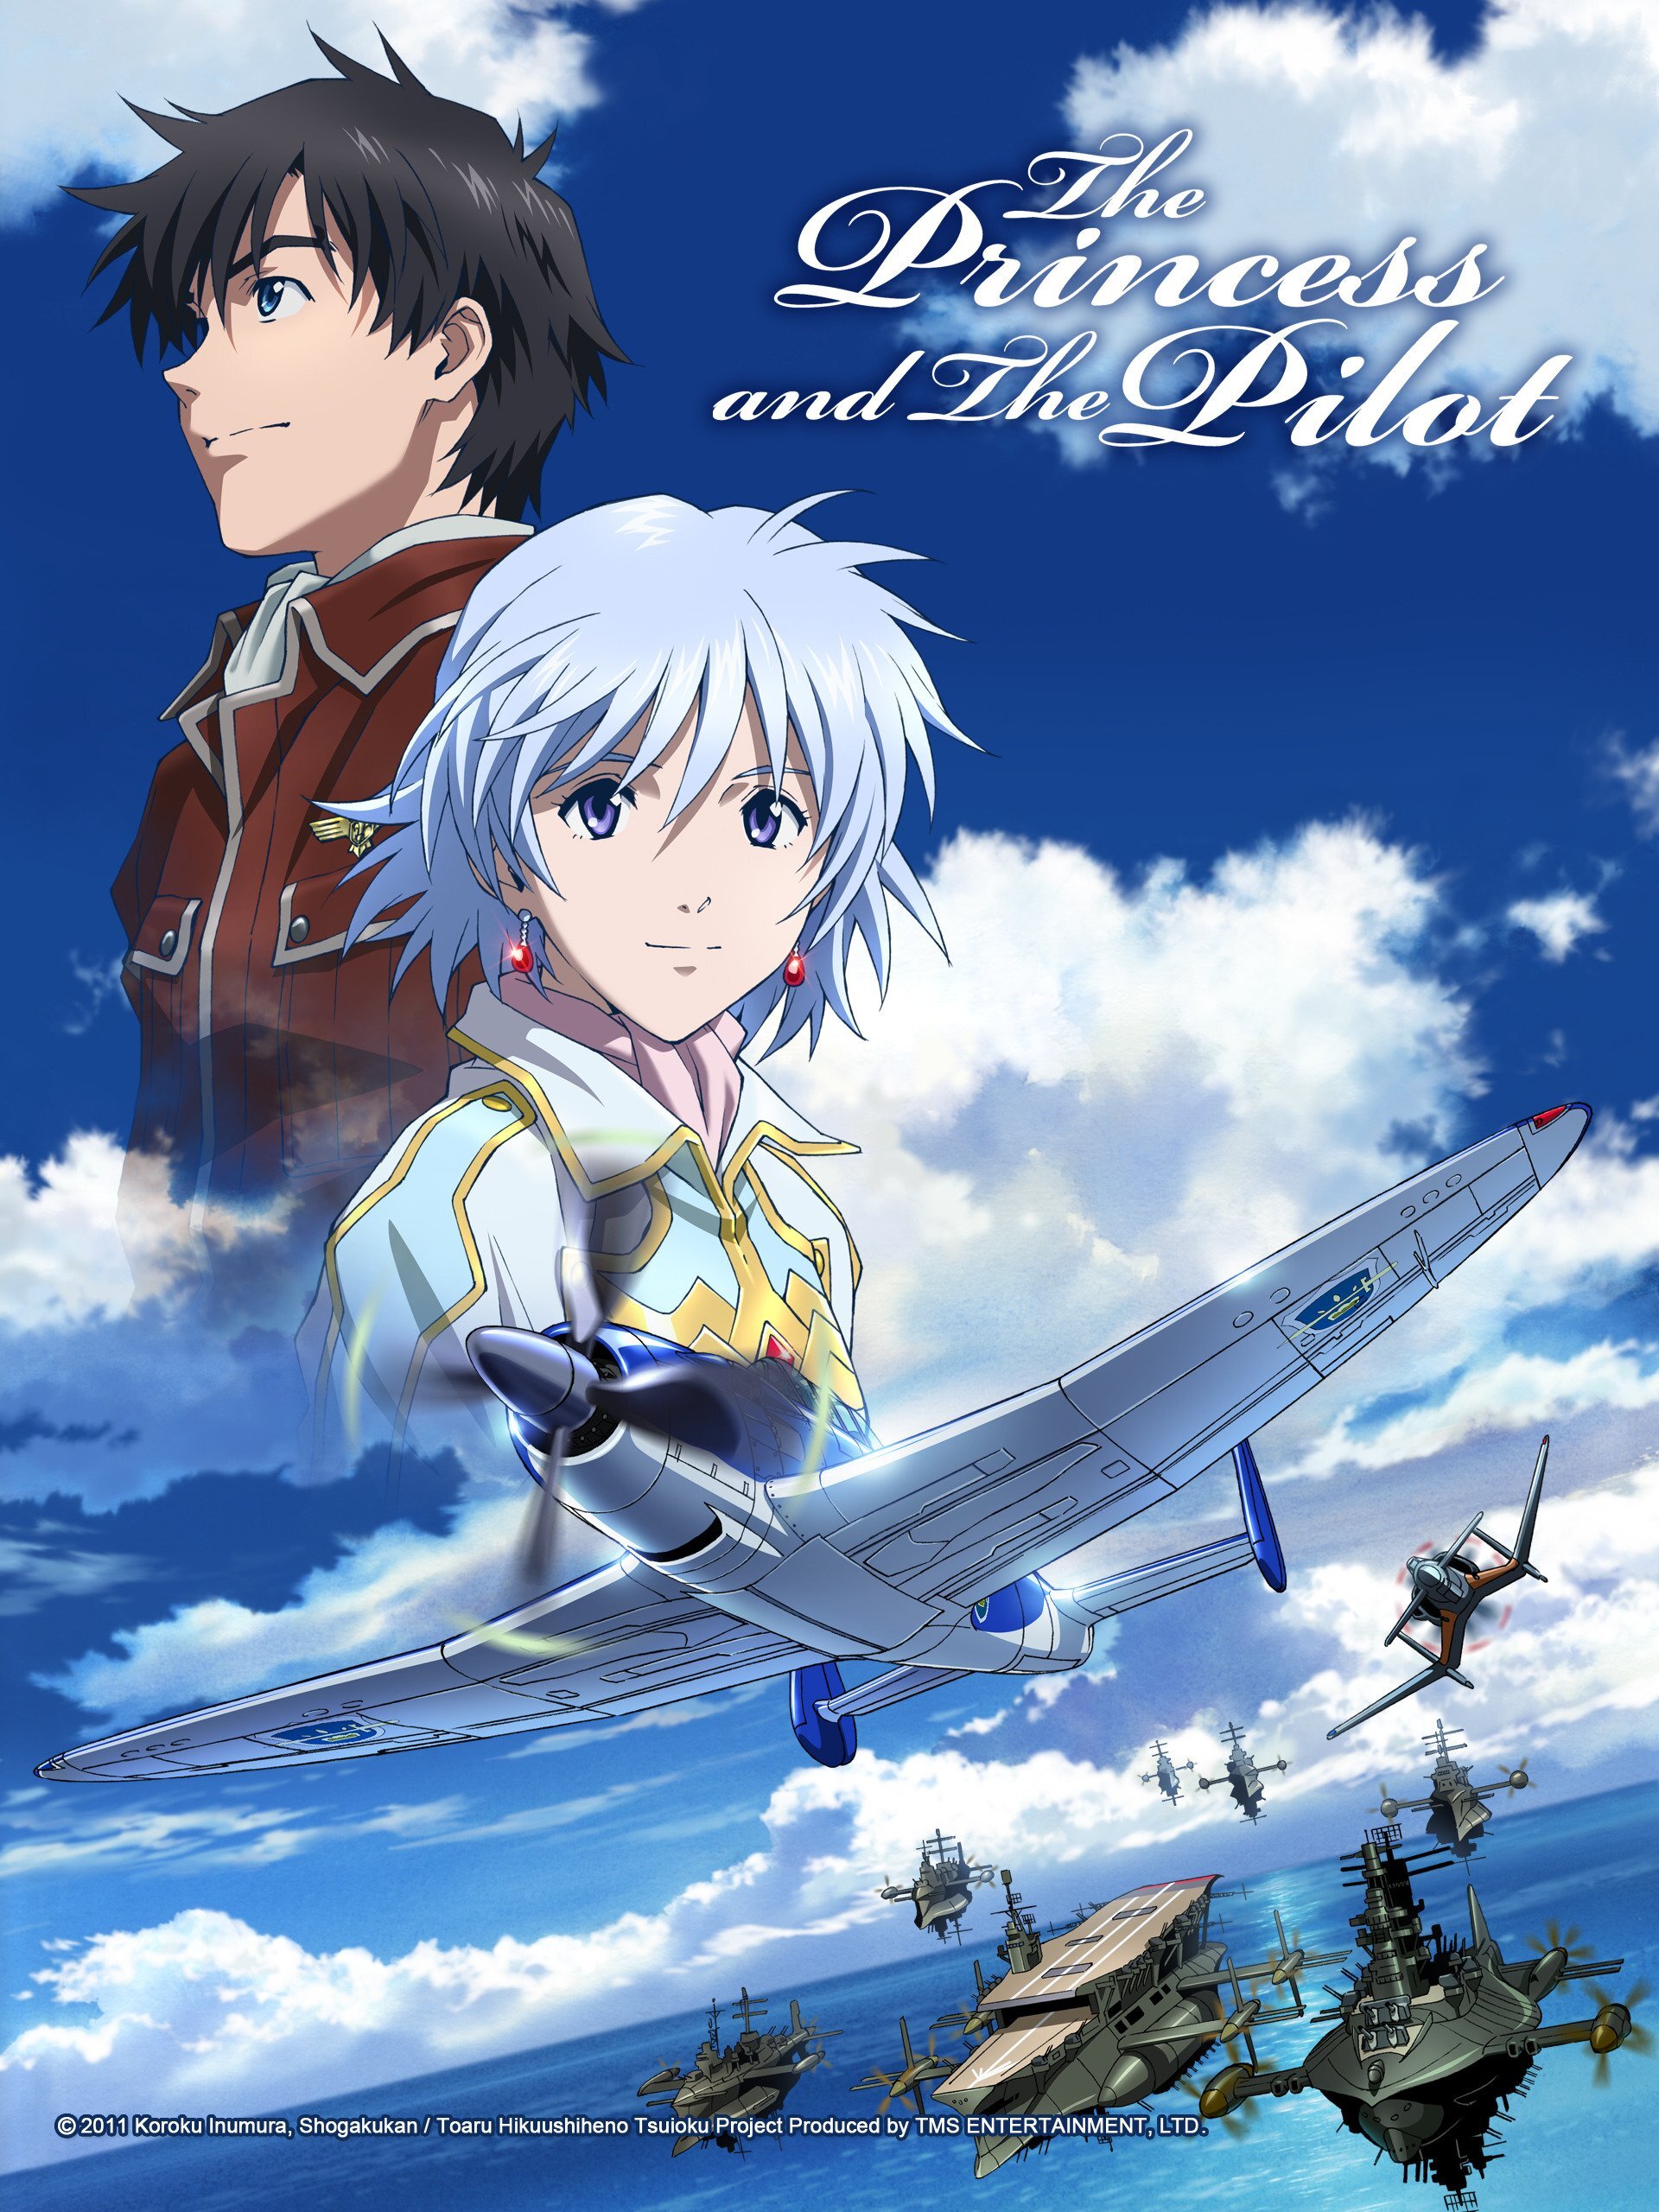 Anime movie cover of The Princess and the Pilot with two people and several planes flying